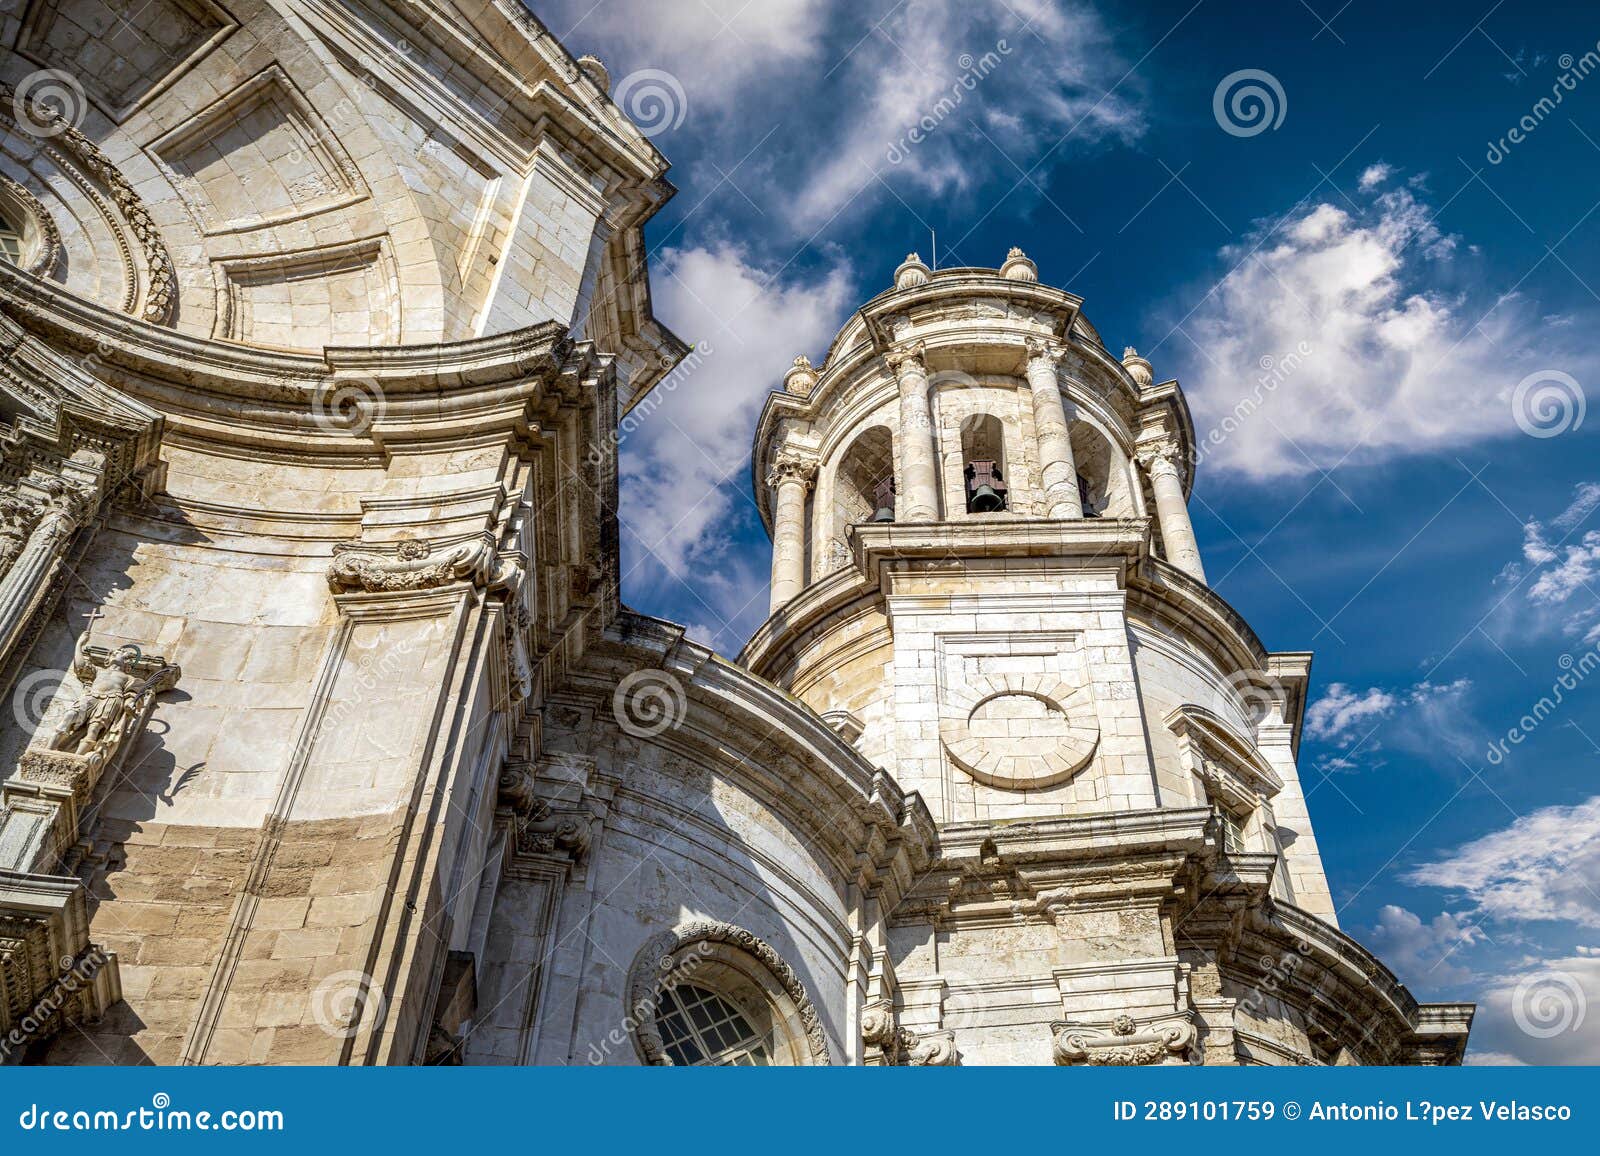 detail of one of the towers of the cathedral of cÃ¡diz, andalusia, spain,